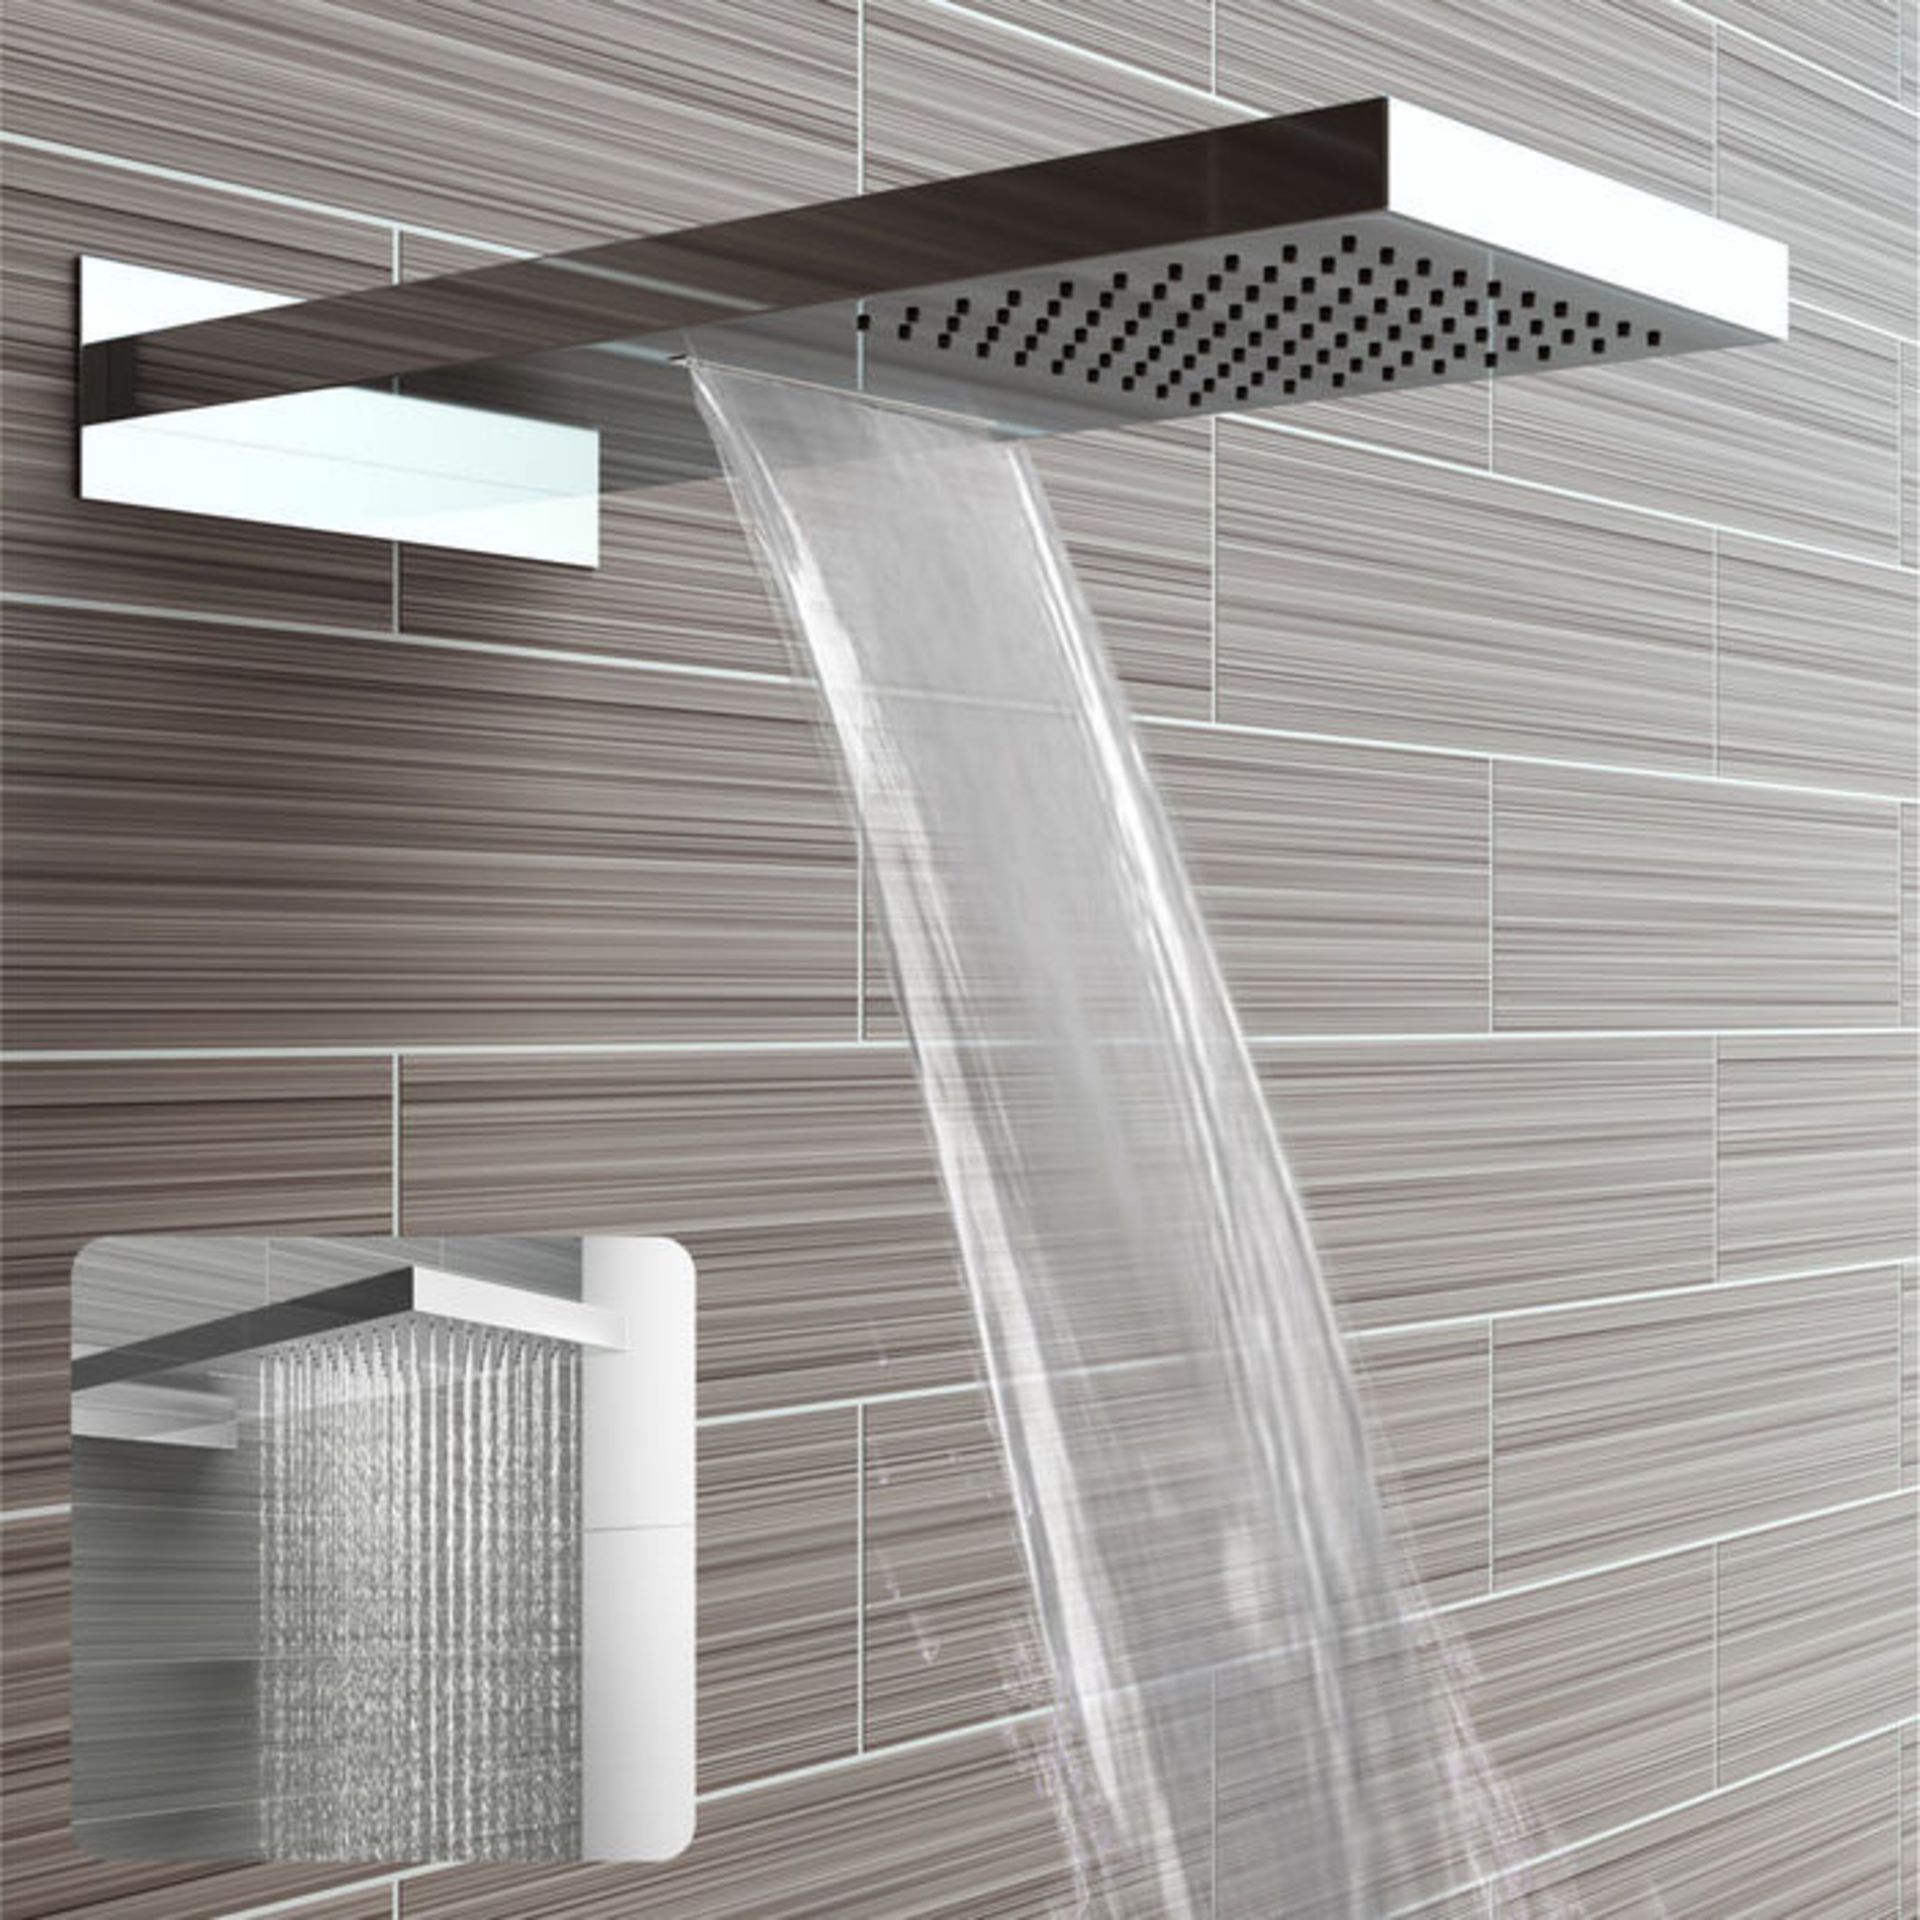 (SP89) Stainless Steel 230x500mm Waterfall Shower Head. RRP £374.98. Dual function waterfall and - Image 2 of 5